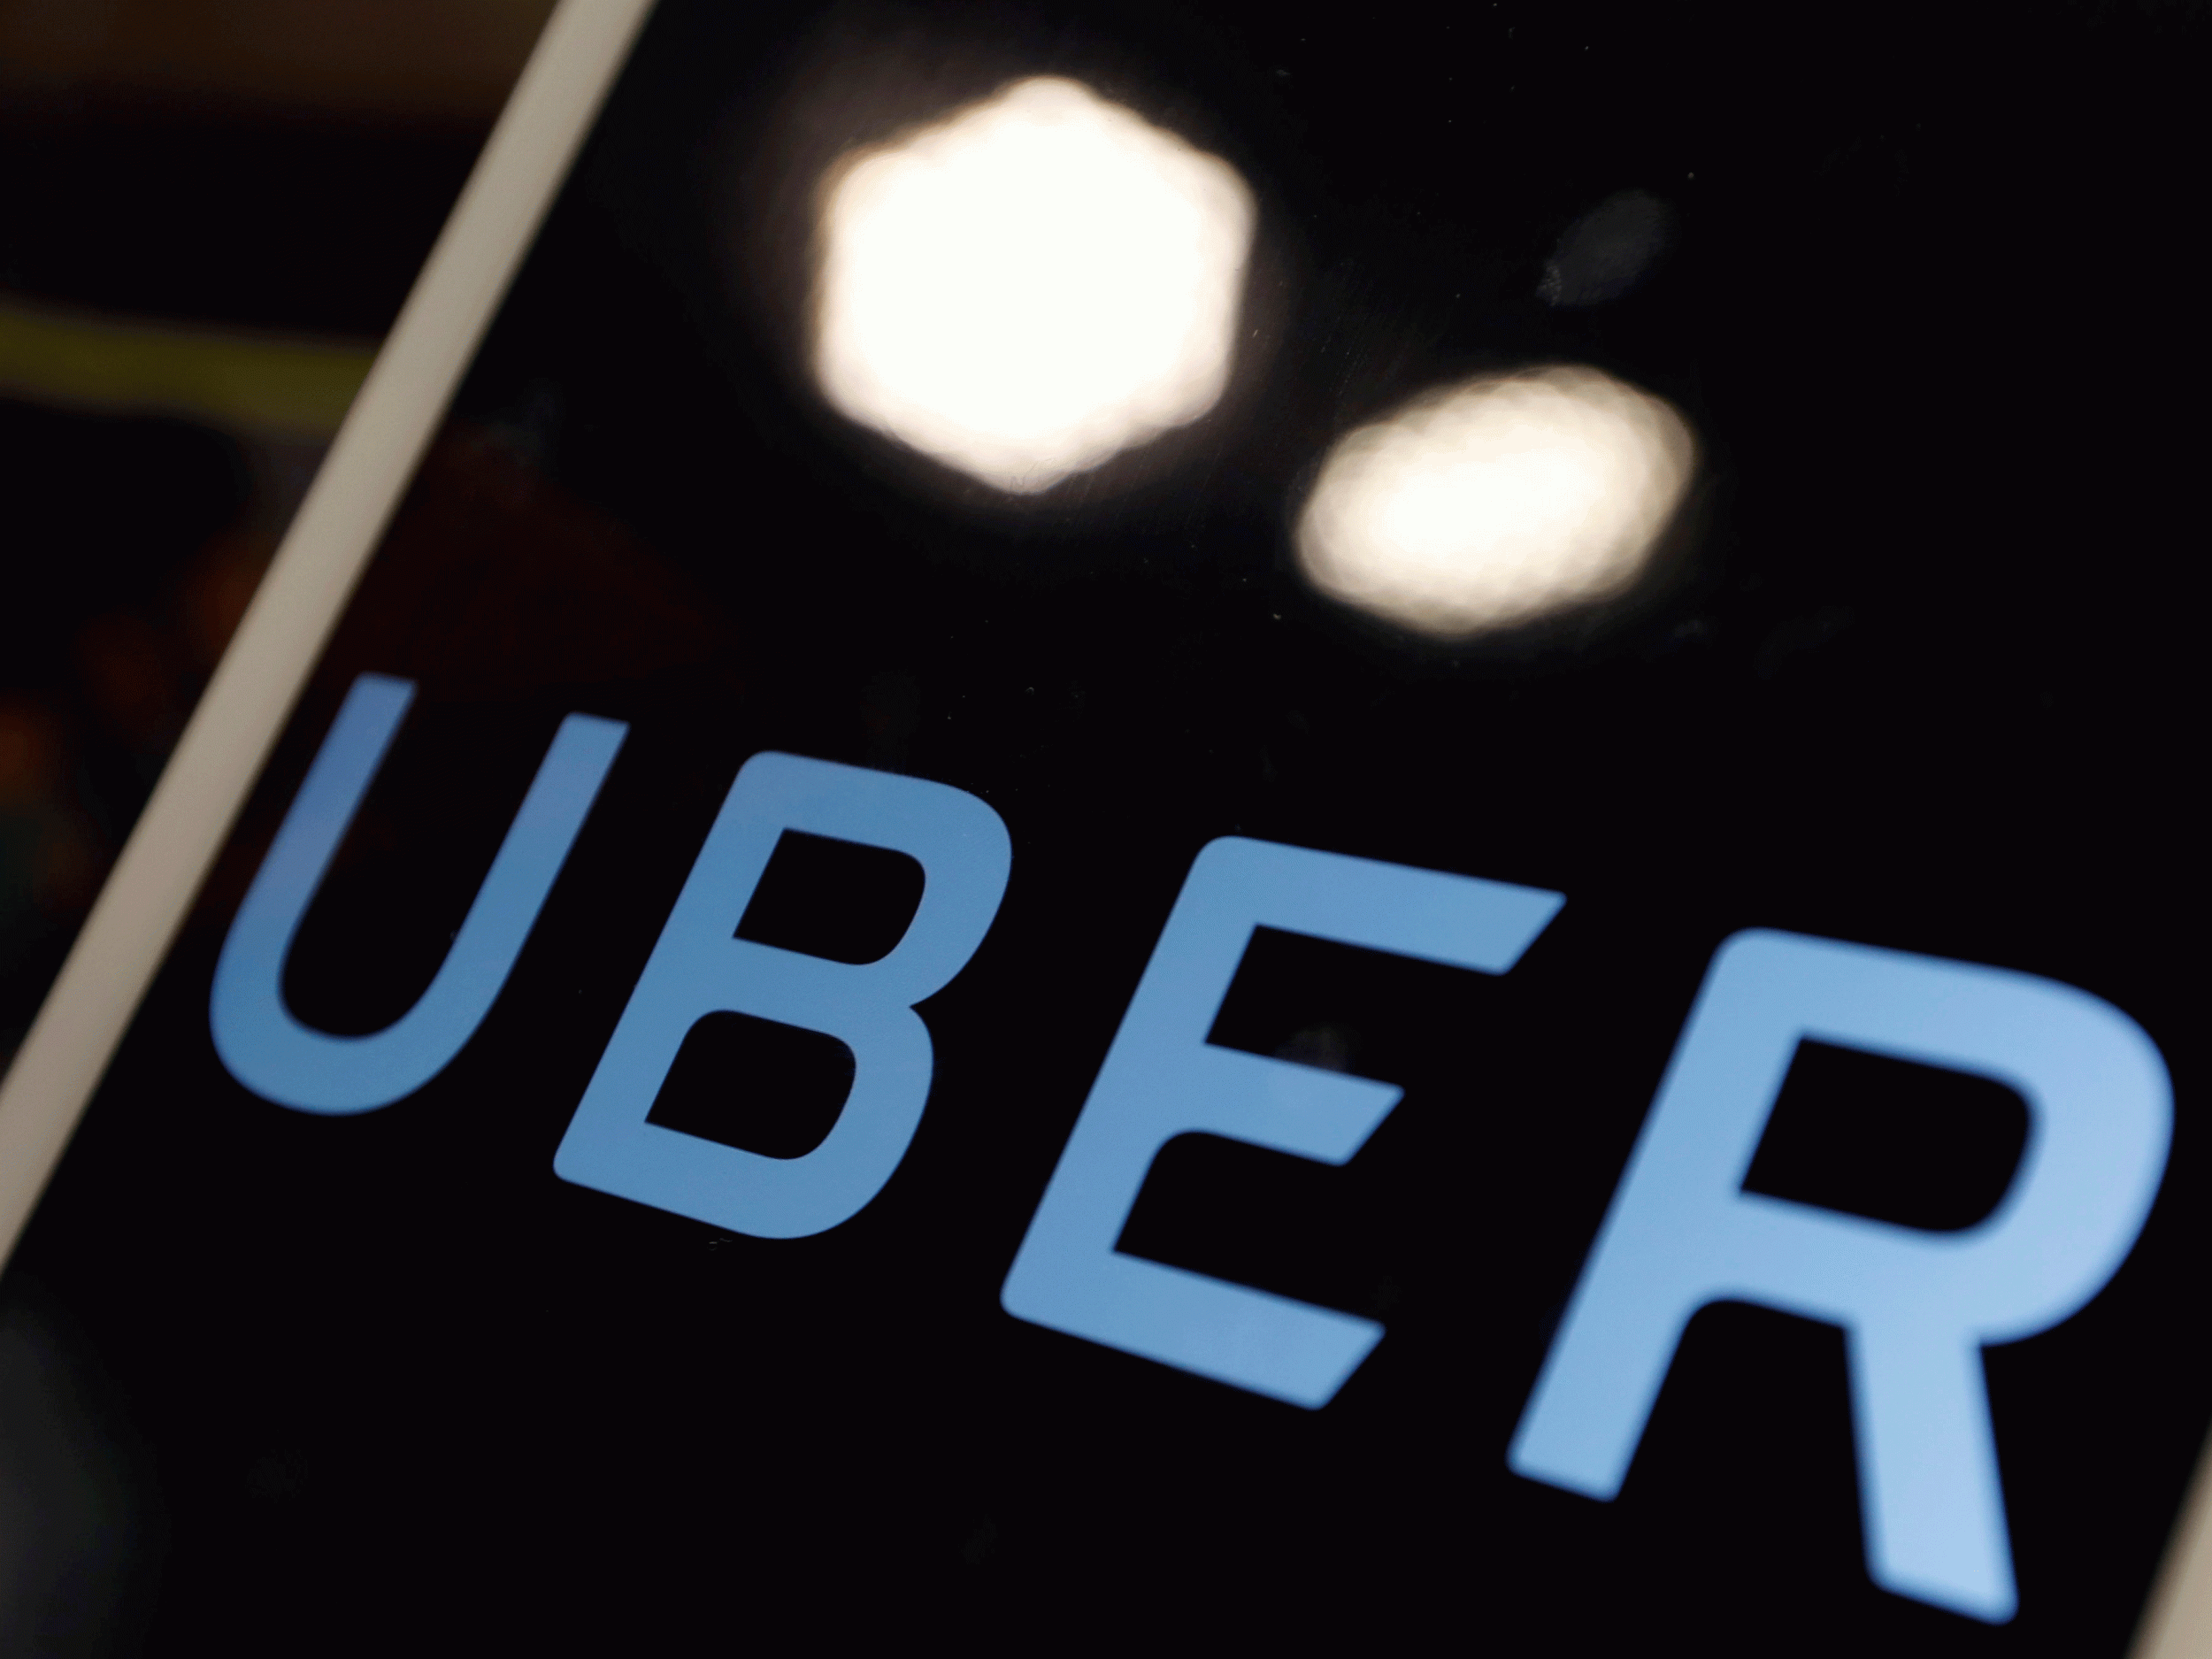 Uber drivers 'working together to create price surge'